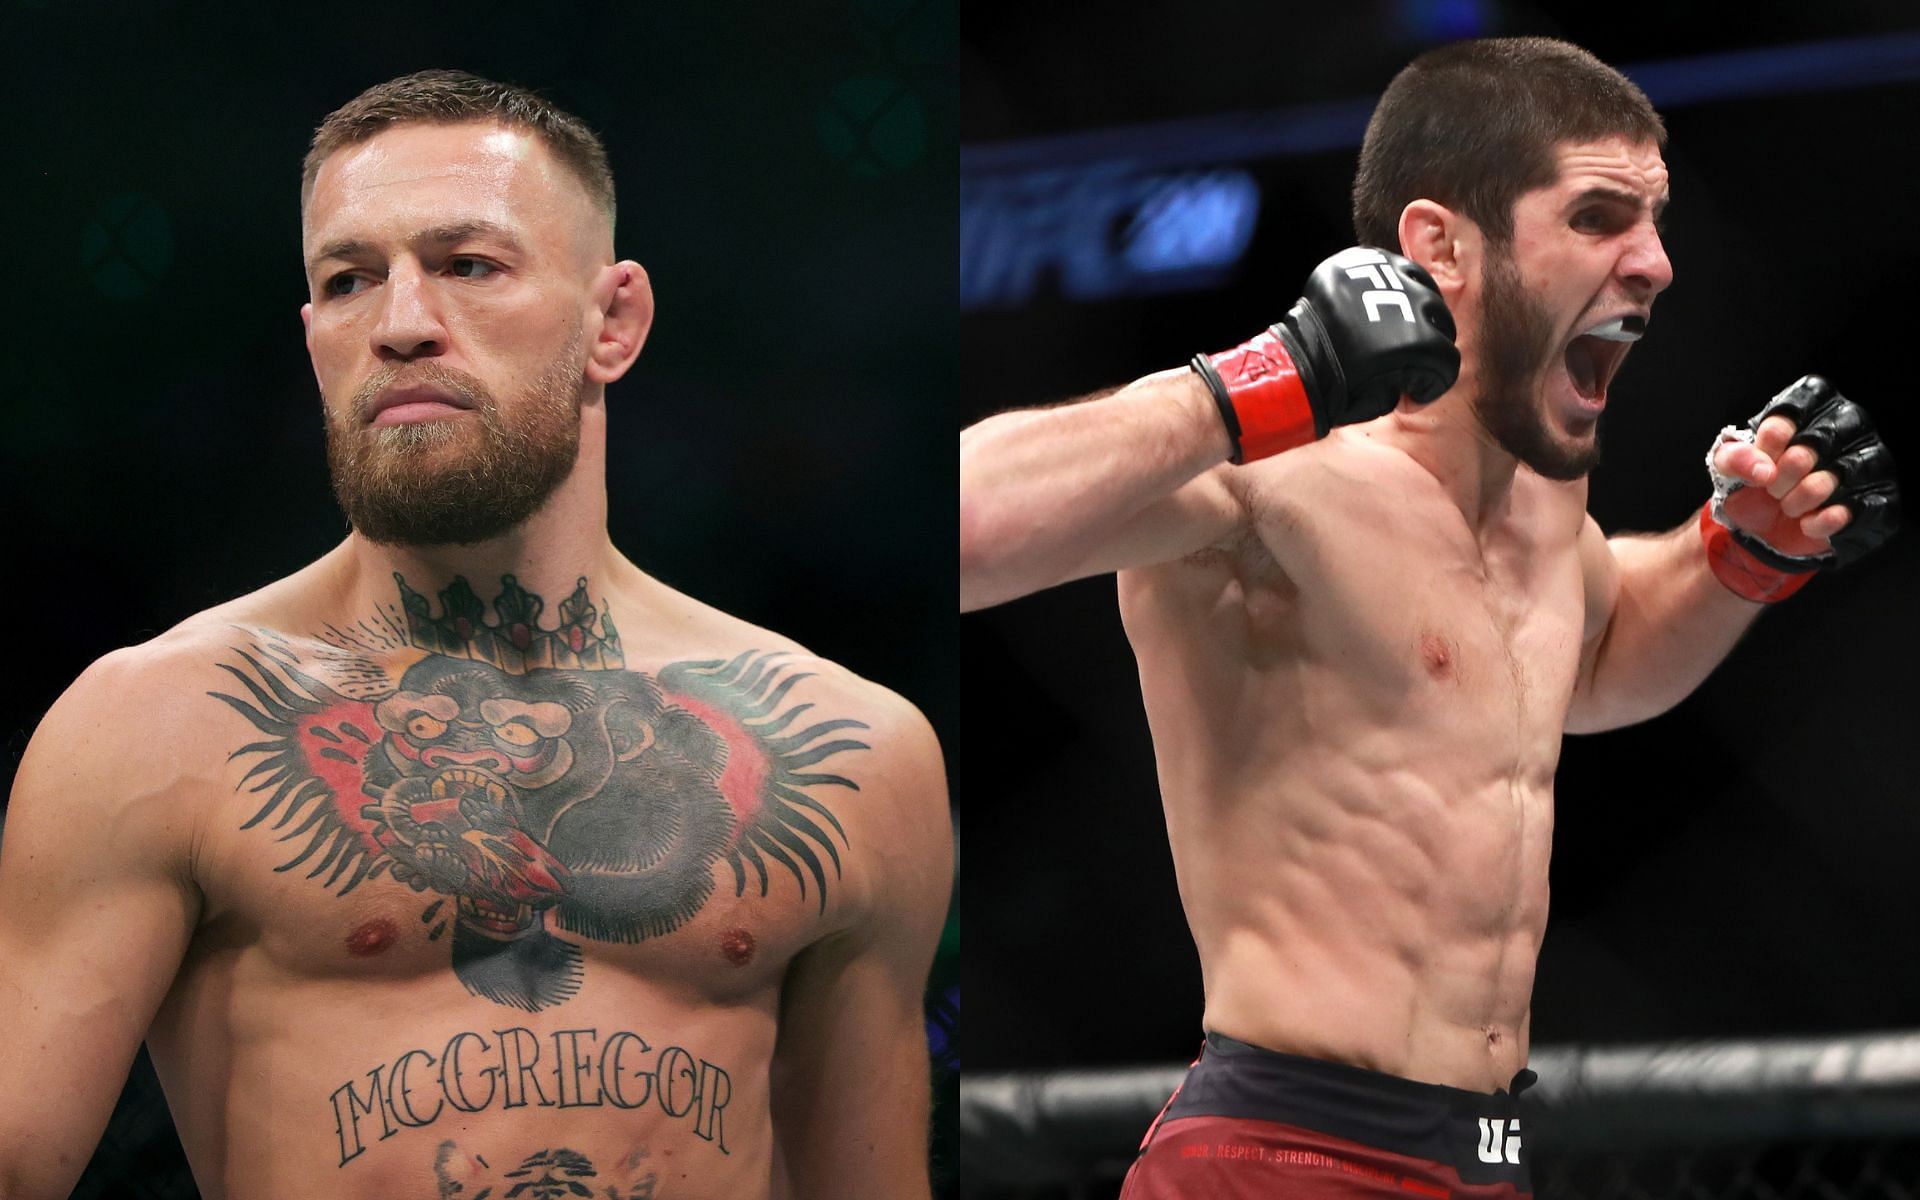 Conor McGregor (left) and Islam Makhachev (right)